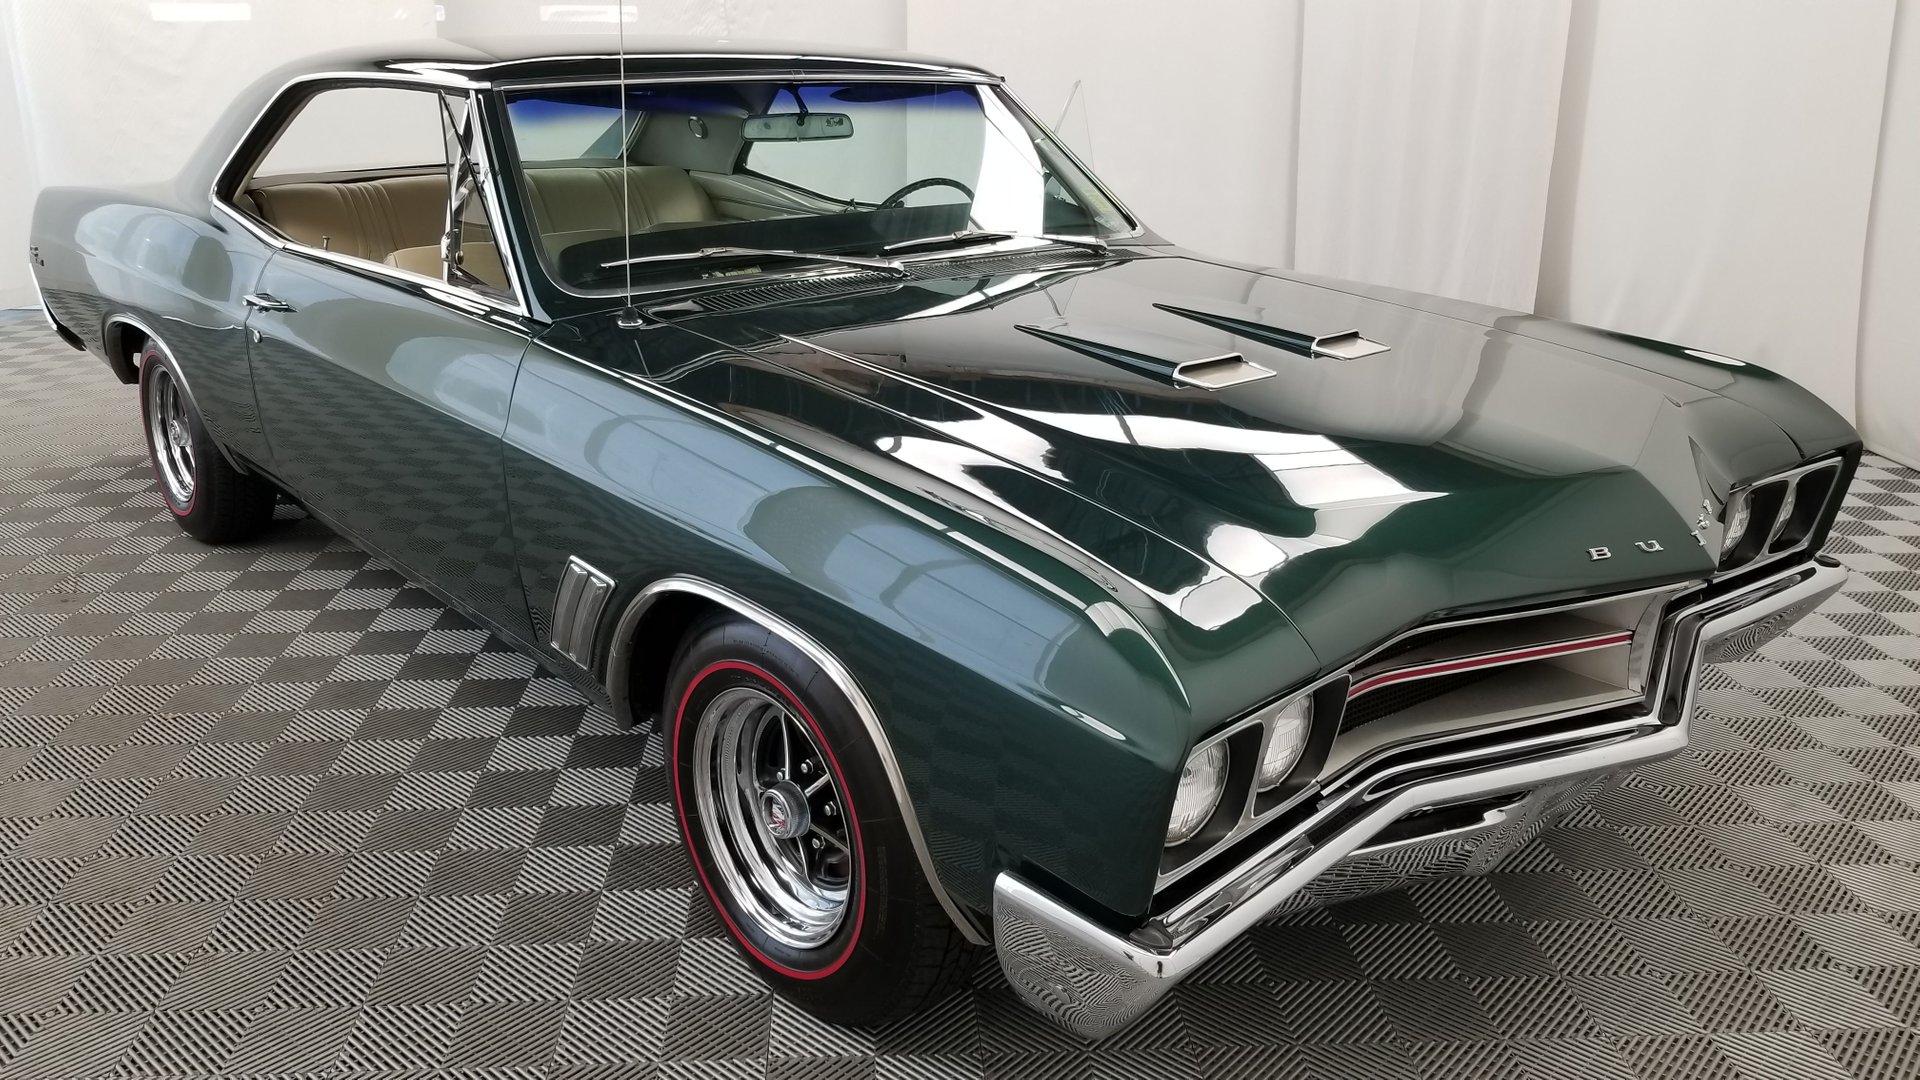 1967 buick gs400